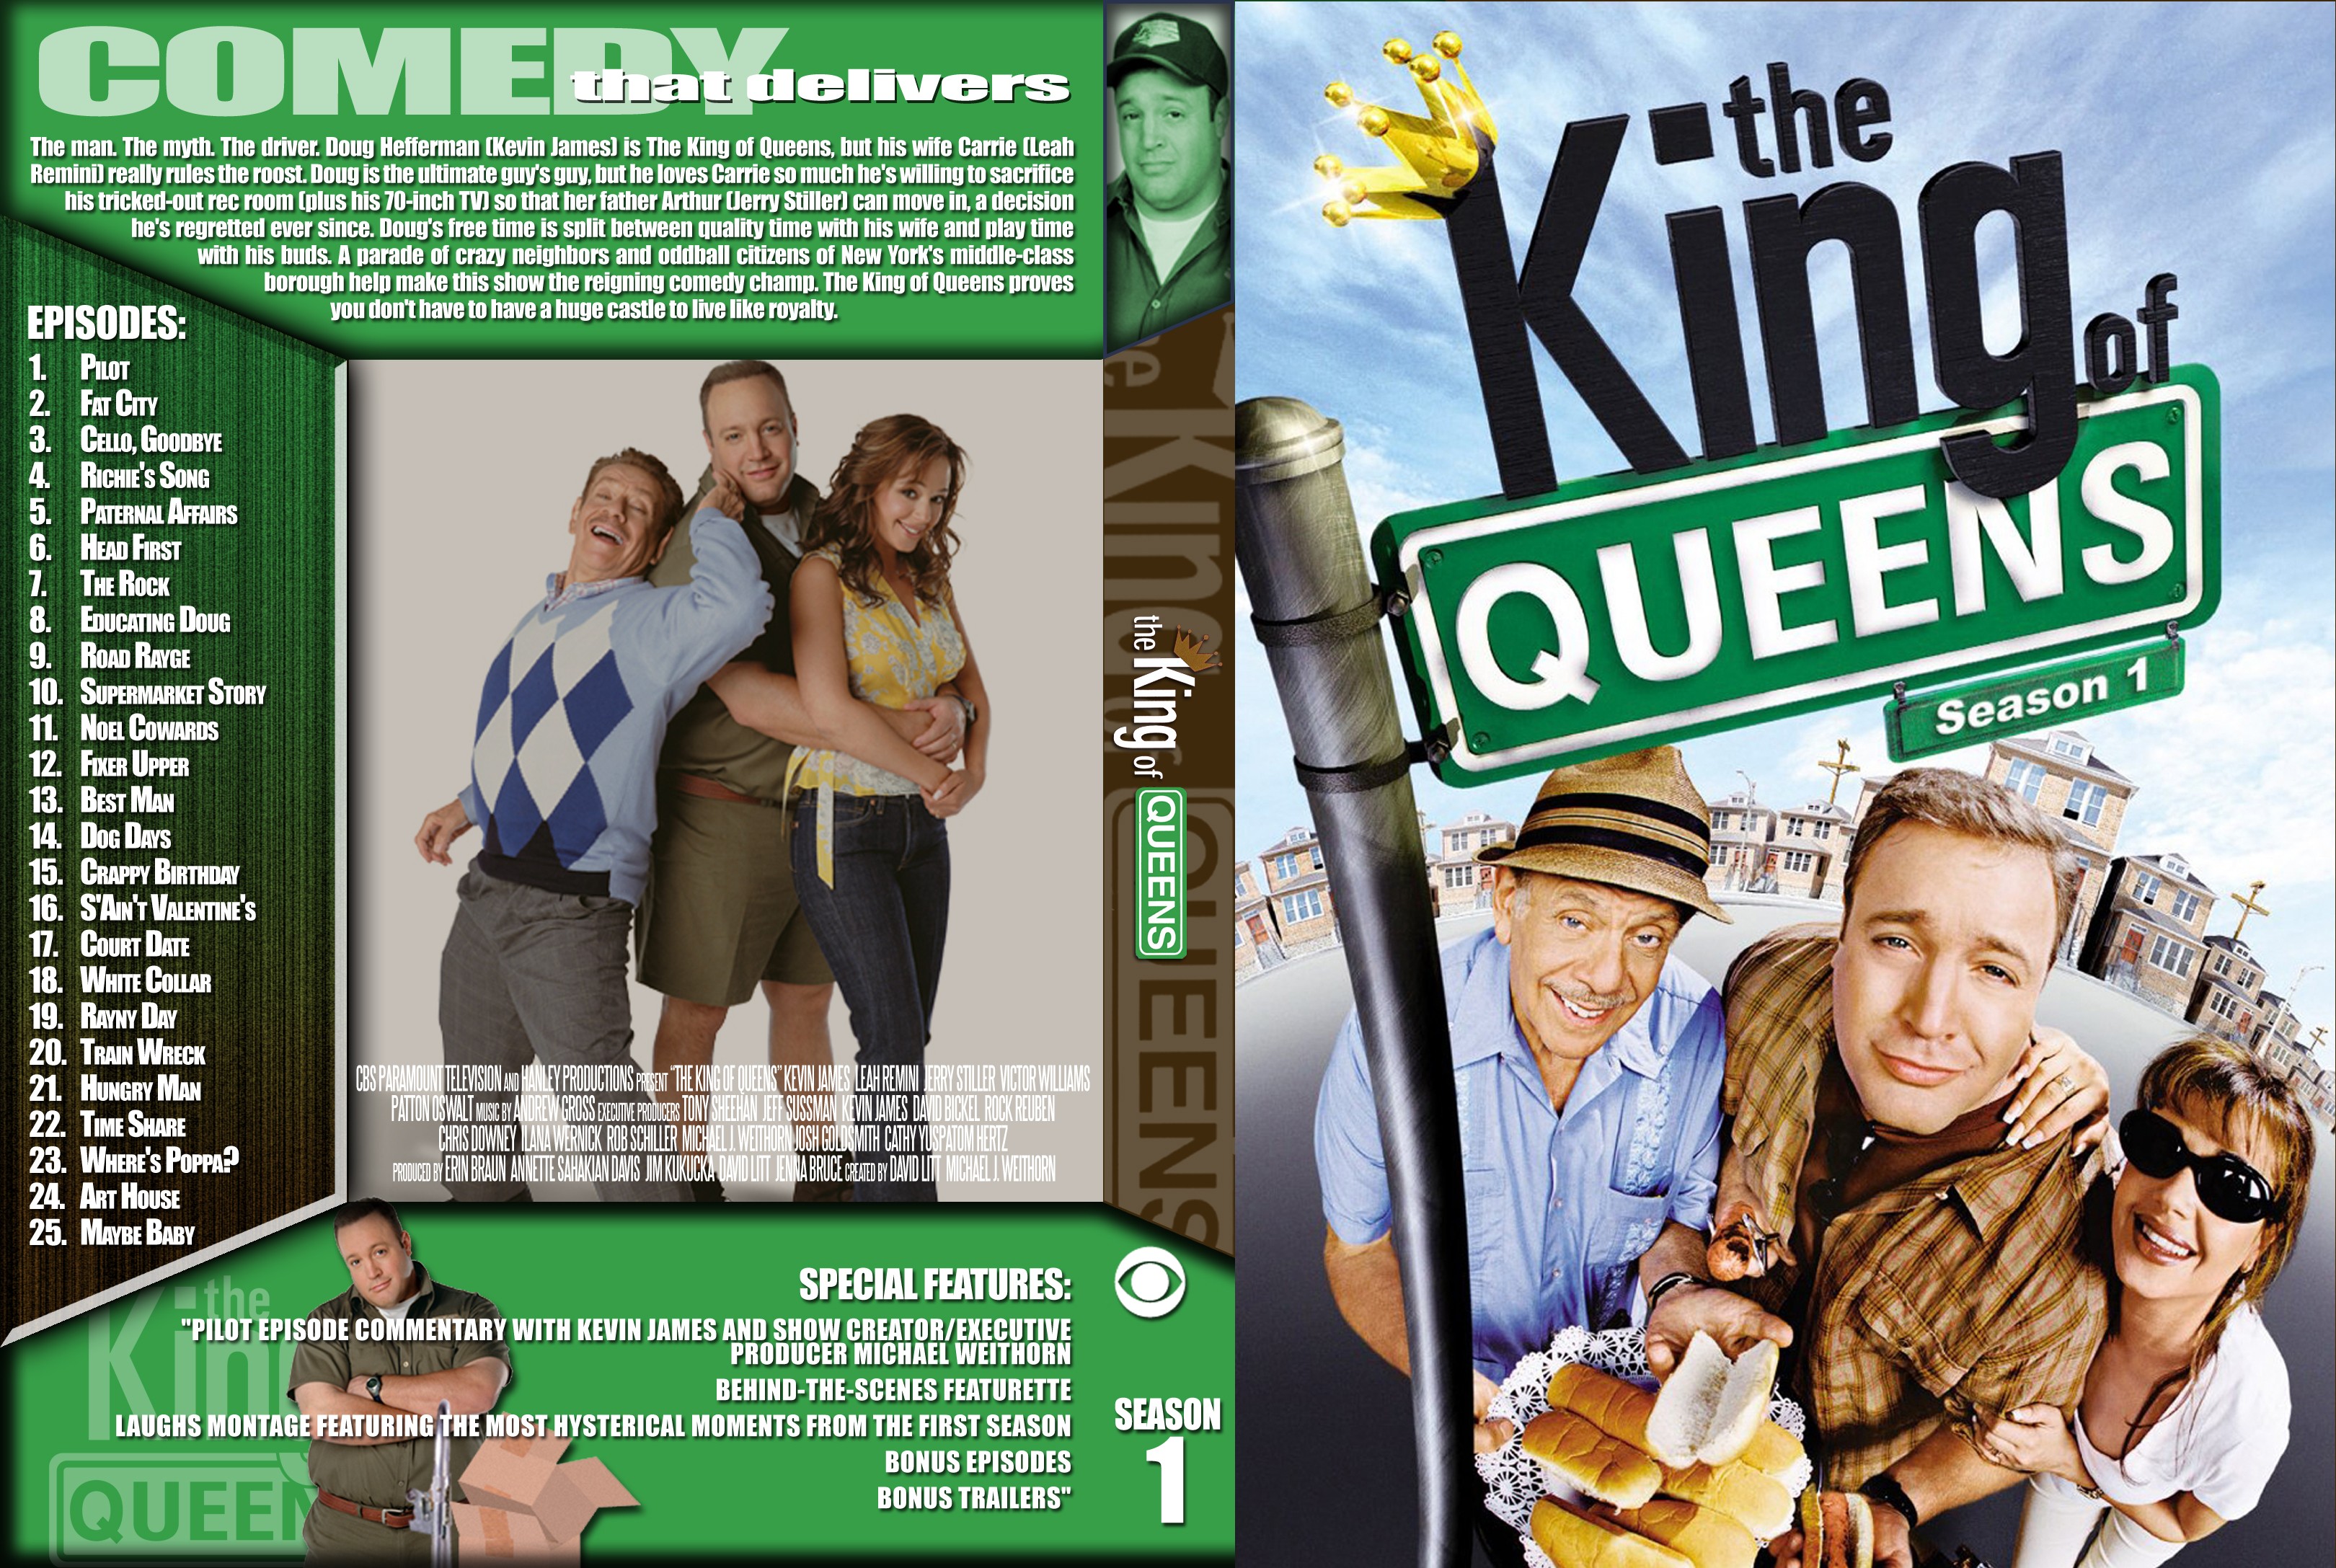 King of Queens: Complete Series [DVD] [Region 1] [US Import] [NTSC]